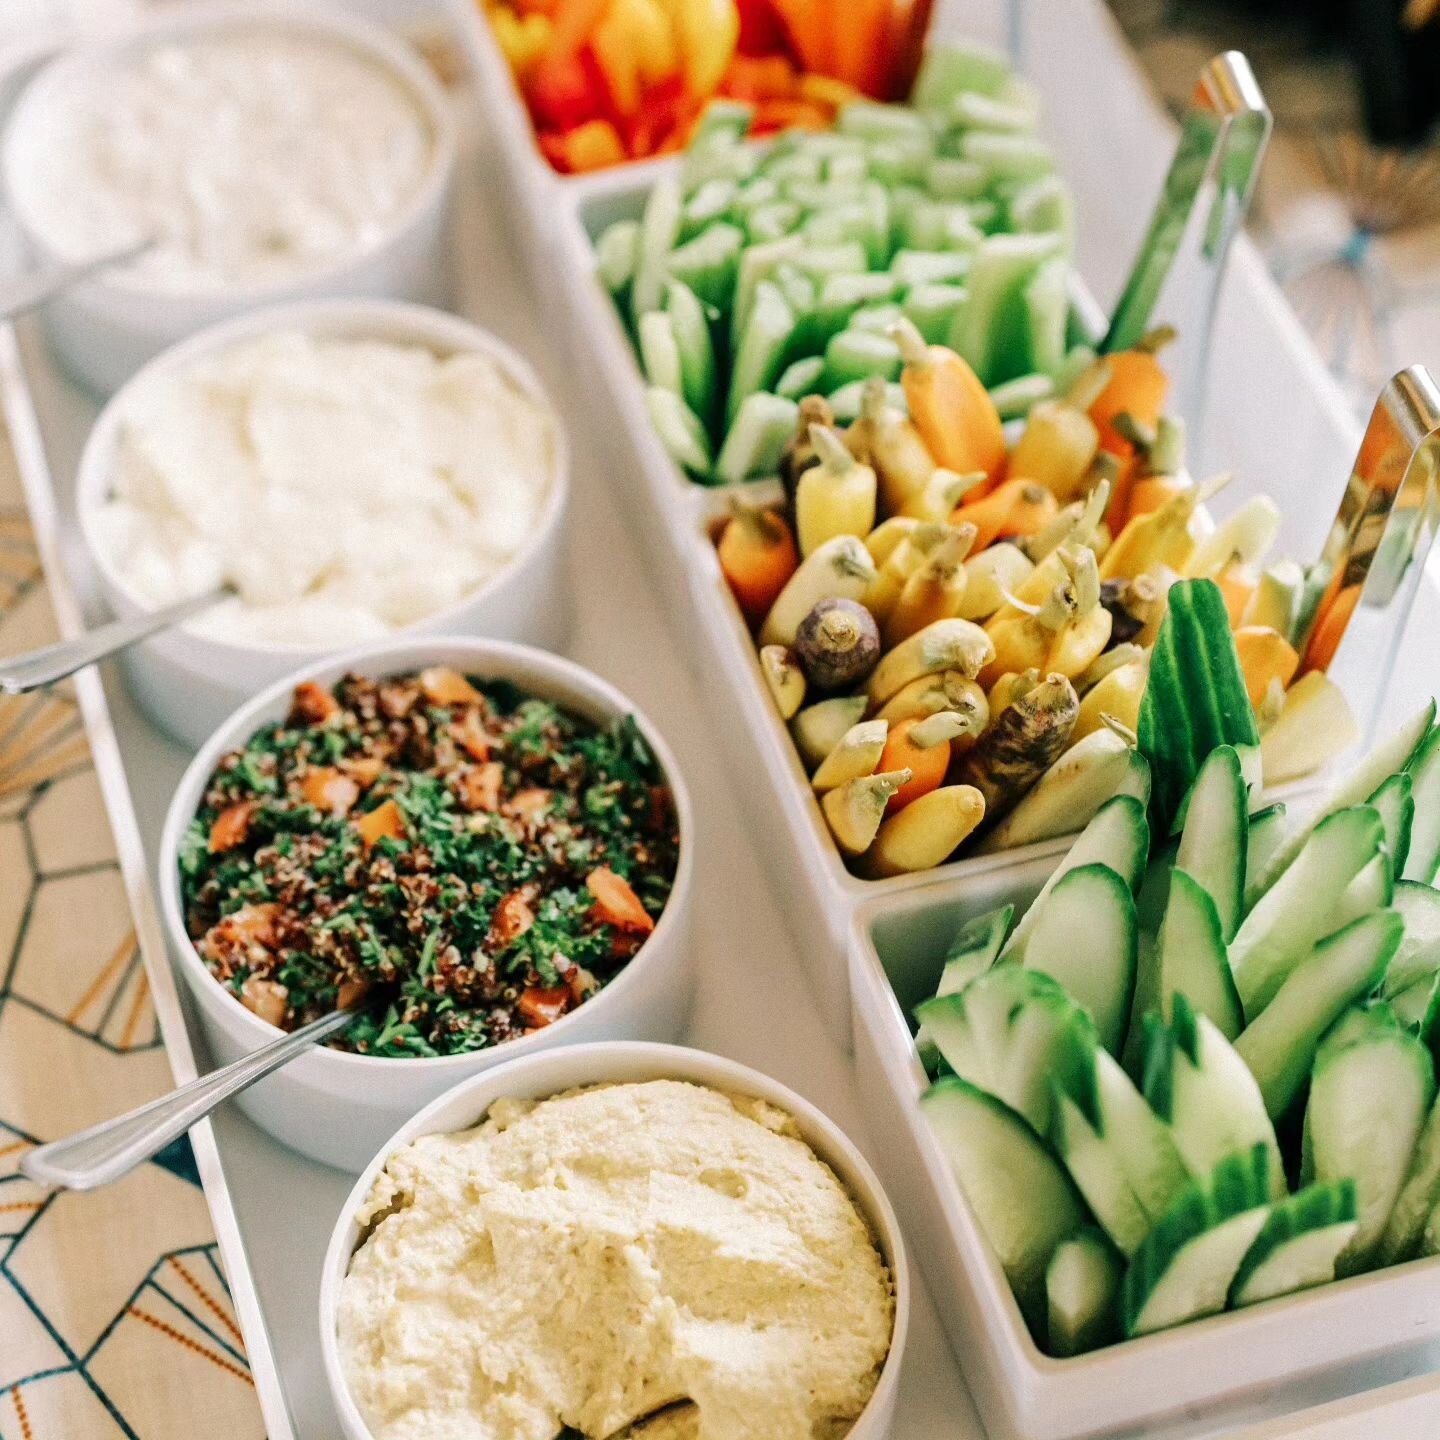 Snacks are the best meal. Convince me otherwise.

📸: @seancookweddings 

#snacks #snack #catering #customcaterer #corporatecaterer #michigancaterer #michigancatering #detroitcaterer #detroitcatering #metrodetroitcatering #metrodetroitcaterer #horsdo